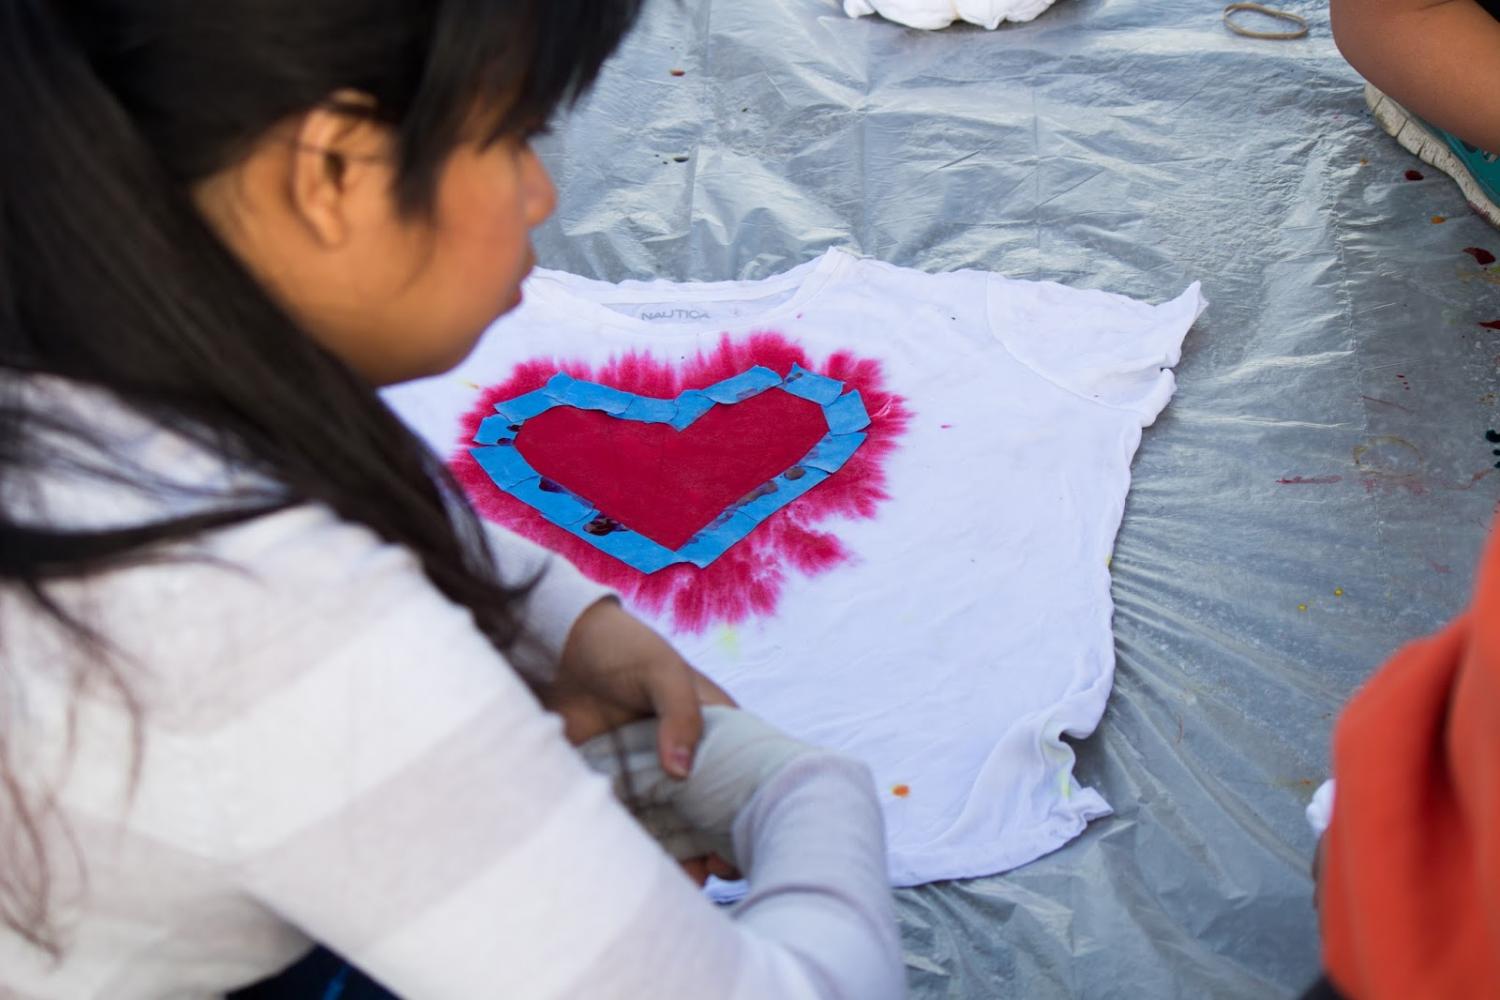 Students used rainbow colors to dye their shirts and custom designed their white crews by using tape to create hearts or patterns to display their pride.